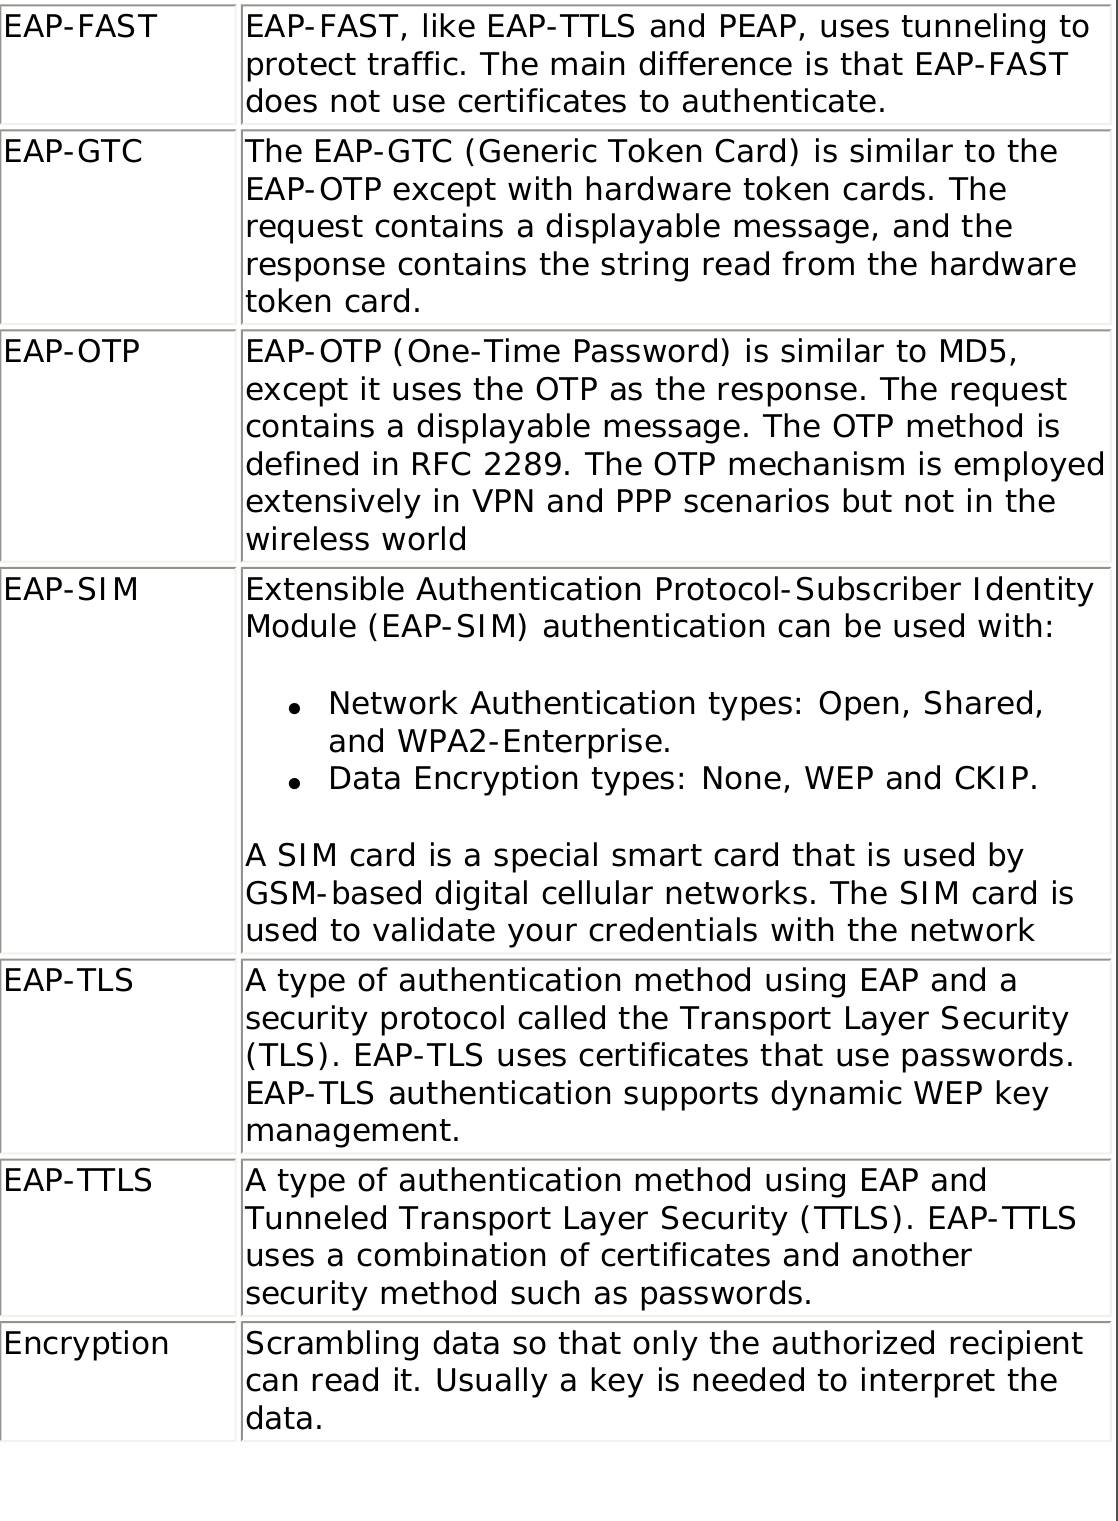 EAP-FAST EAP-FAST, like EAP-TTLS and PEAP, uses tunneling to protect traffic. The main difference is that EAP-FAST does not use certificates to authenticate. EAP-GTC The EAP-GTC (Generic Token Card) is similar to the EAP-OTP except with hardware token cards. The request contains a displayable message, and the response contains the string read from the hardware token card. EAP-OTP EAP-OTP (One-Time Password) is similar to MD5, except it uses the OTP as the response. The request contains a displayable message. The OTP method is defined in RFC 2289. The OTP mechanism is employed extensively in VPN and PPP scenarios but not in the wireless worldEAP-SIM Extensible Authentication Protocol-Subscriber Identity Module (EAP-SIM) authentication can be used with: ●     Network Authentication types: Open, Shared, and WPA2-Enterprise. ●     Data Encryption types: None, WEP and CKIP. A SIM card is a special smart card that is used by GSM-based digital cellular networks. The SIM card is used to validate your credentials with the networkEAP-TLS A type of authentication method using EAP and a security protocol called the Transport Layer Security (TLS). EAP-TLS uses certificates that use passwords. EAP-TLS authentication supports dynamic WEP key management.EAP-TTLS A type of authentication method using EAP and Tunneled Transport Layer Security (TTLS). EAP-TTLS uses a combination of certificates and another security method such as passwords.Encryption Scrambling data so that only the authorized recipient can read it. Usually a key is needed to interpret the data.